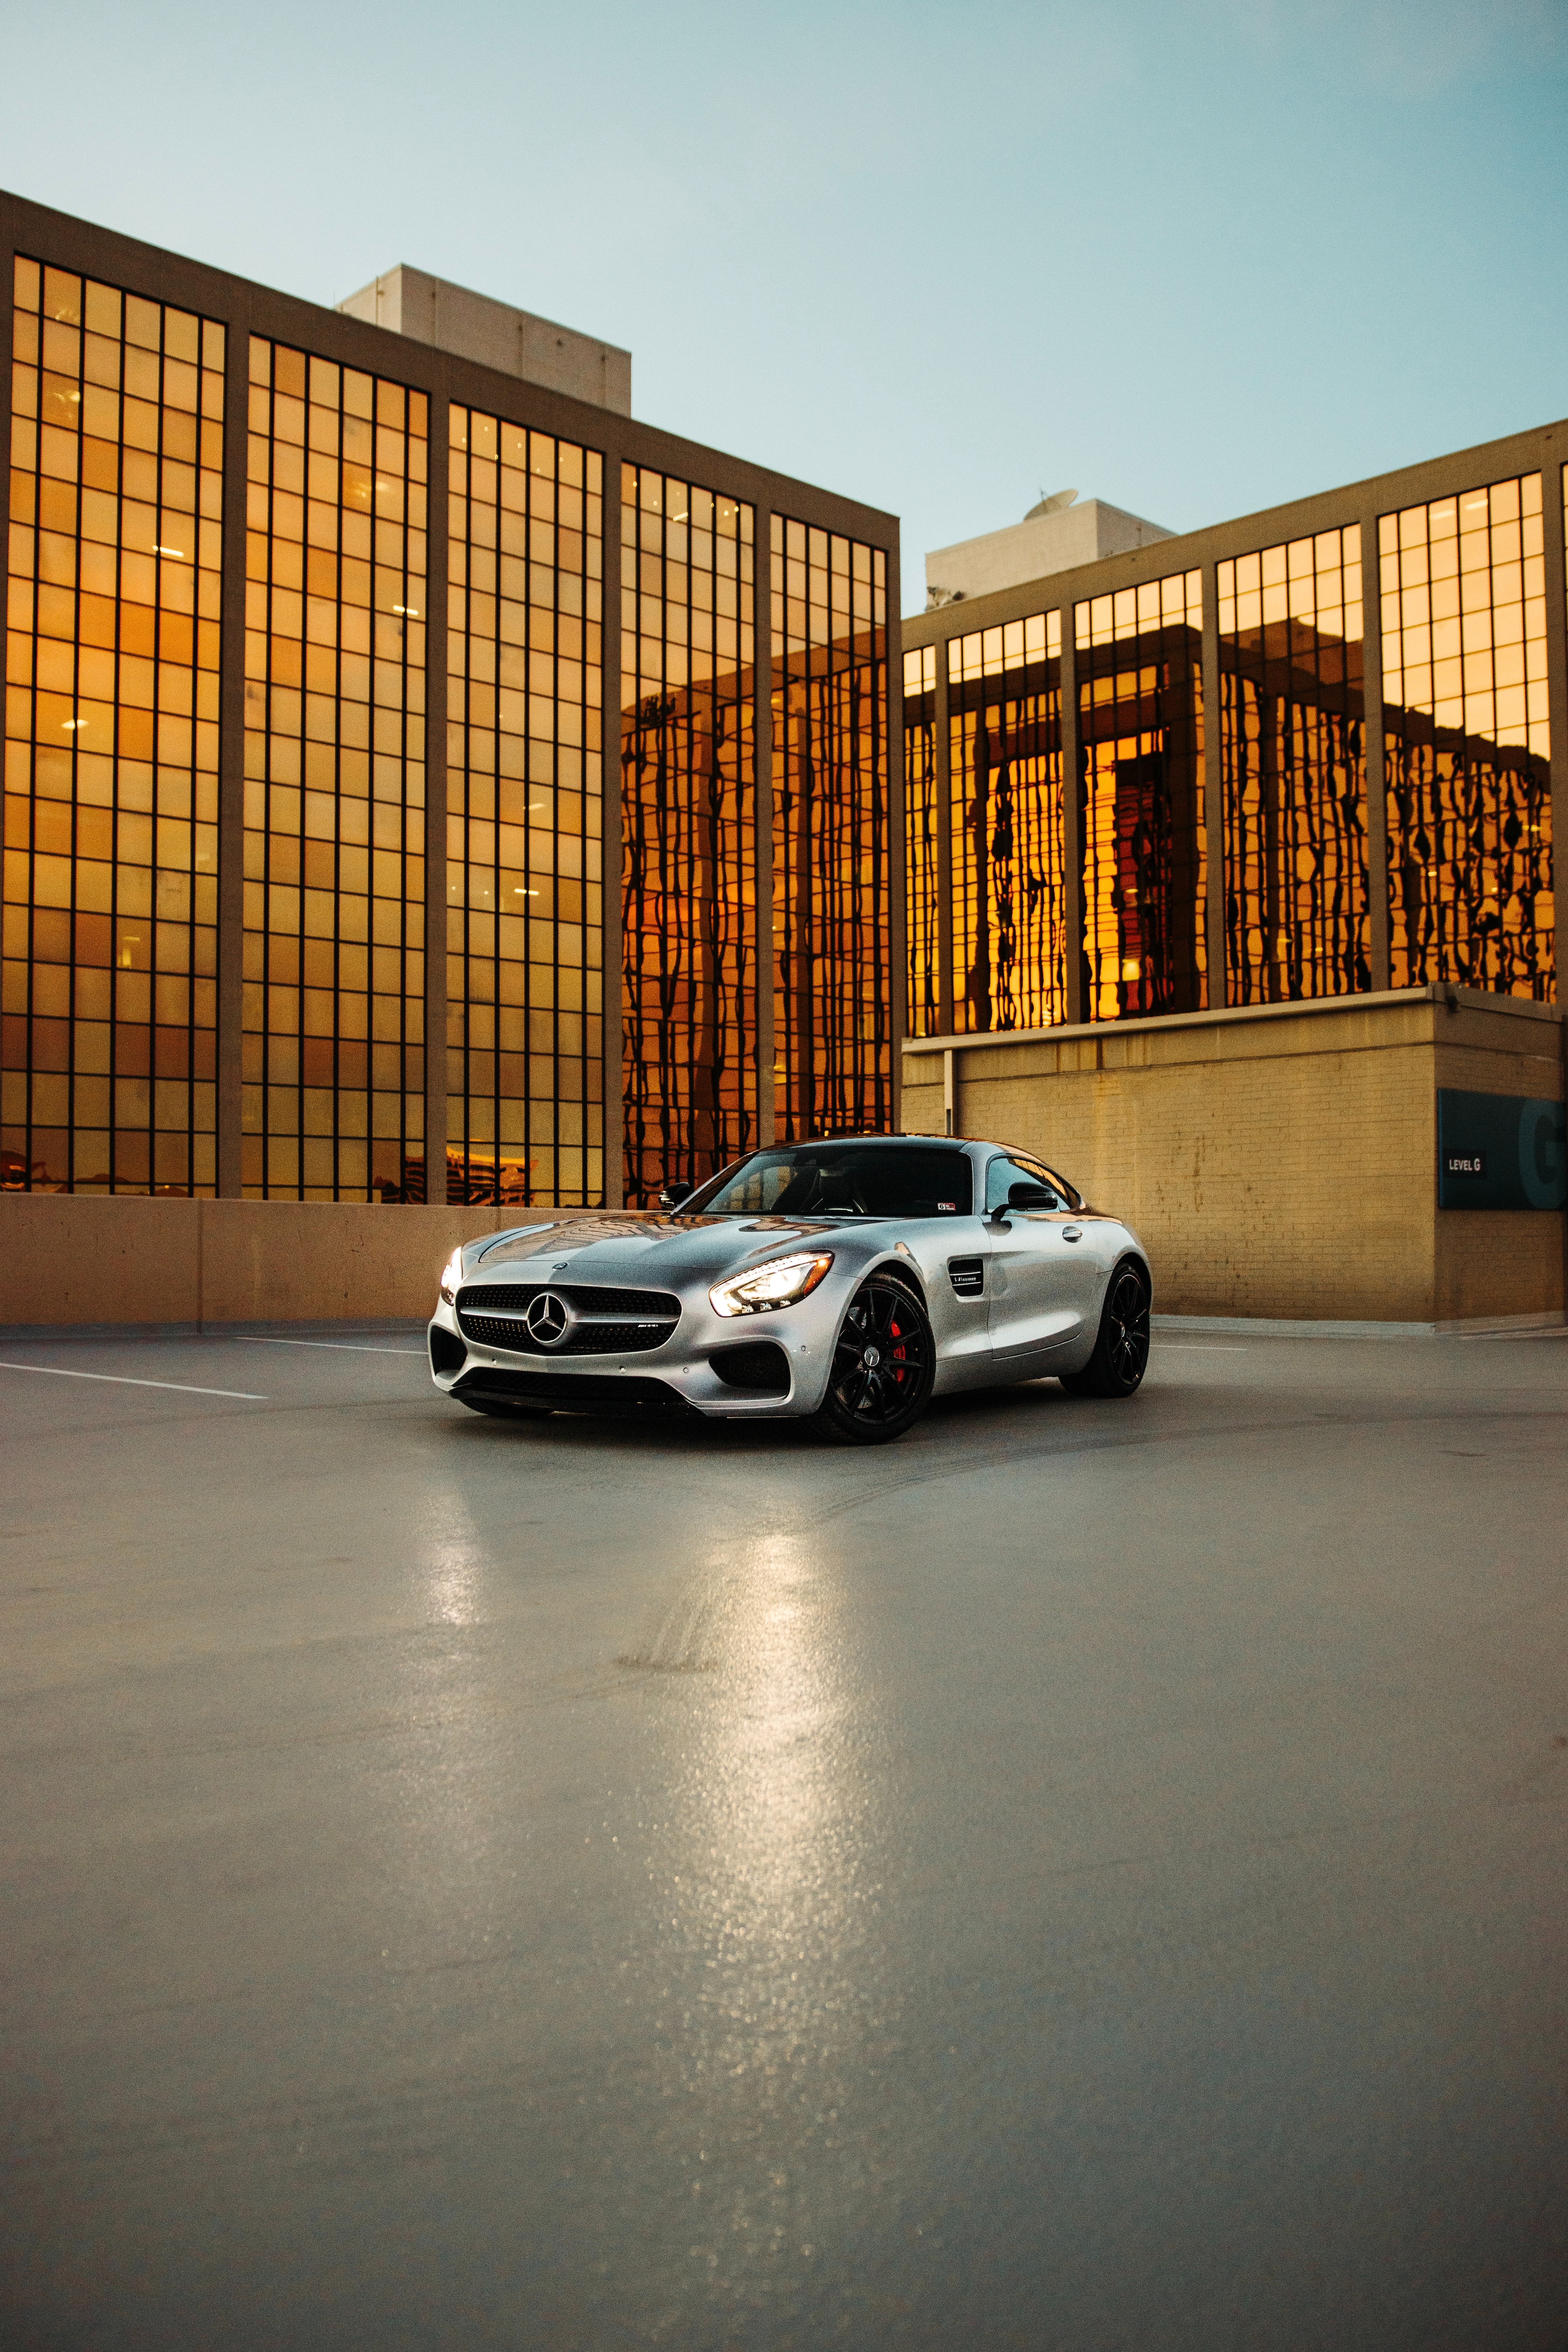 wallpapers cars, building, car, grey, mercedes, parking